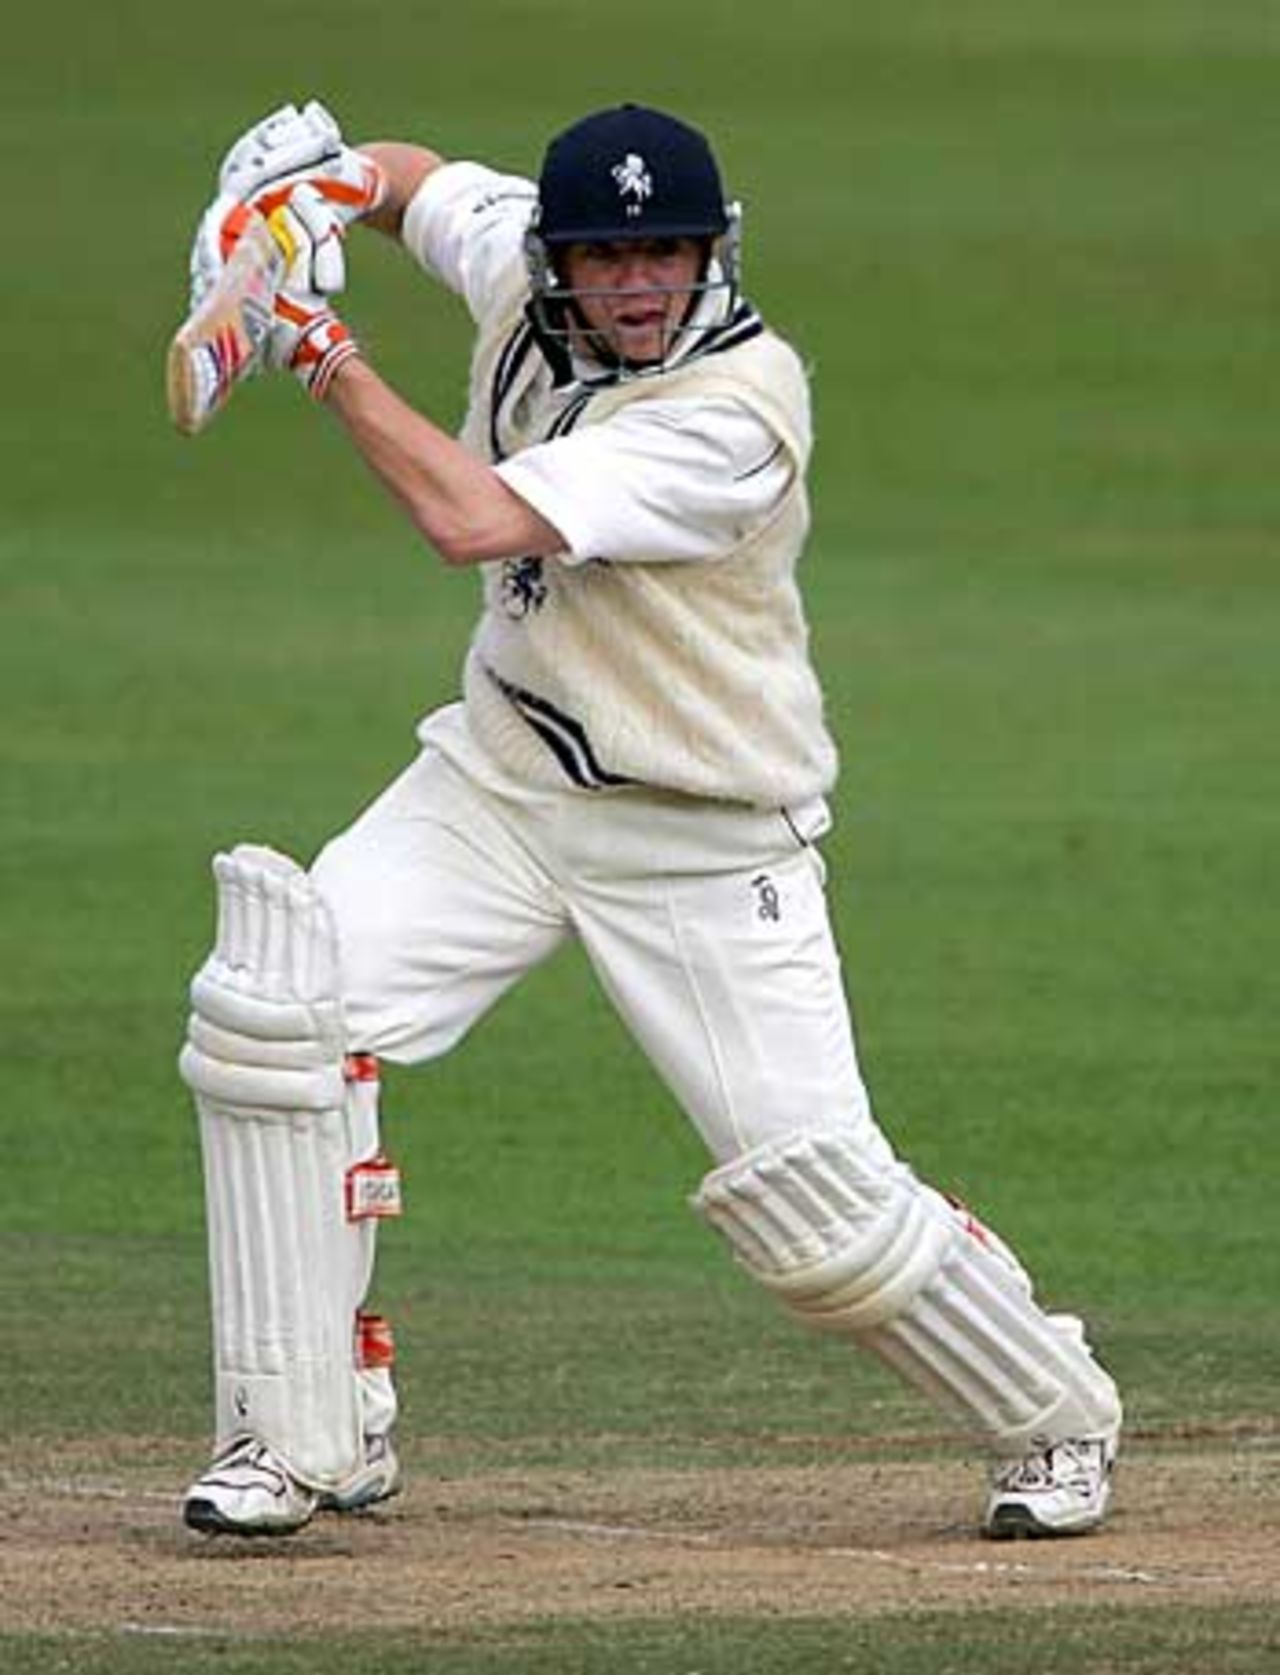 Niall O'Brien drives through the off-side, Nottinghamshire v Kent, Canterbury, September 16, 2005